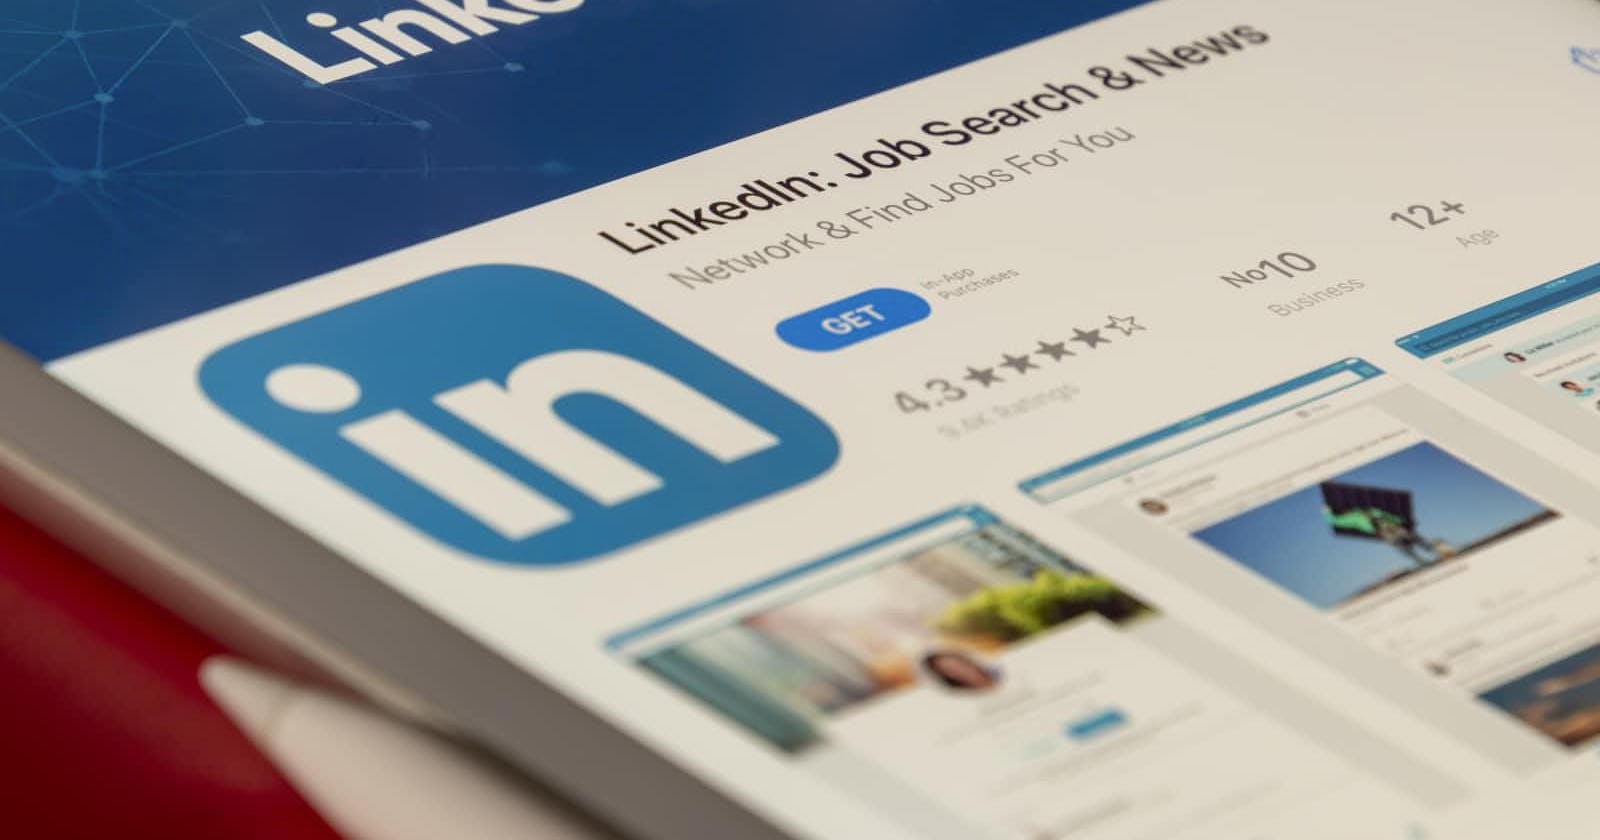 How I Get many interview invitations by just Optimizing my LinkedIn Profile.